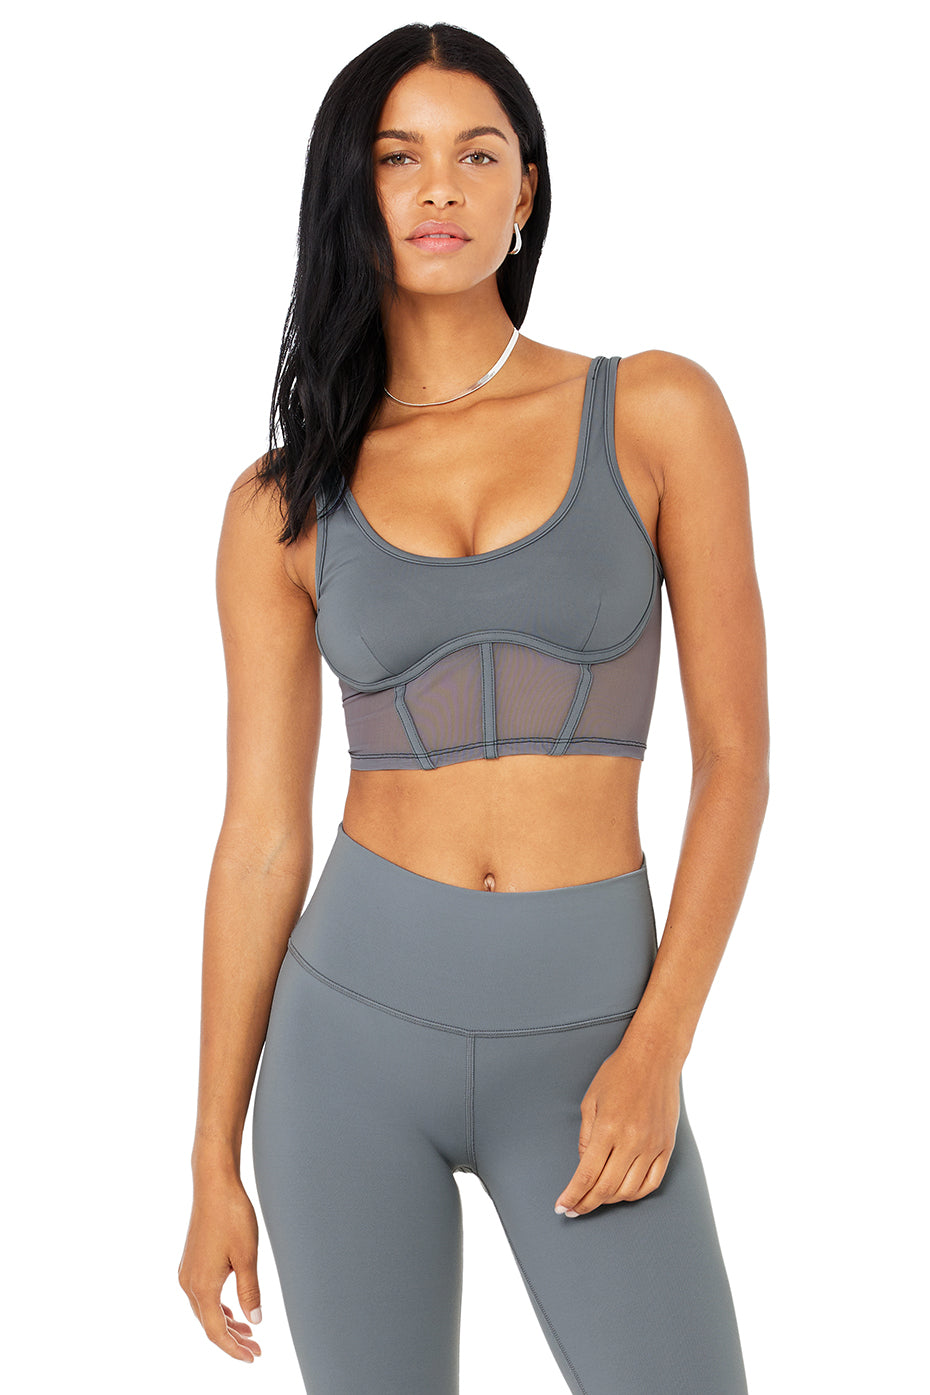 Airbrush Mesh Corset Tank Top in Espresso by Alo Yoga - Work Well Daily